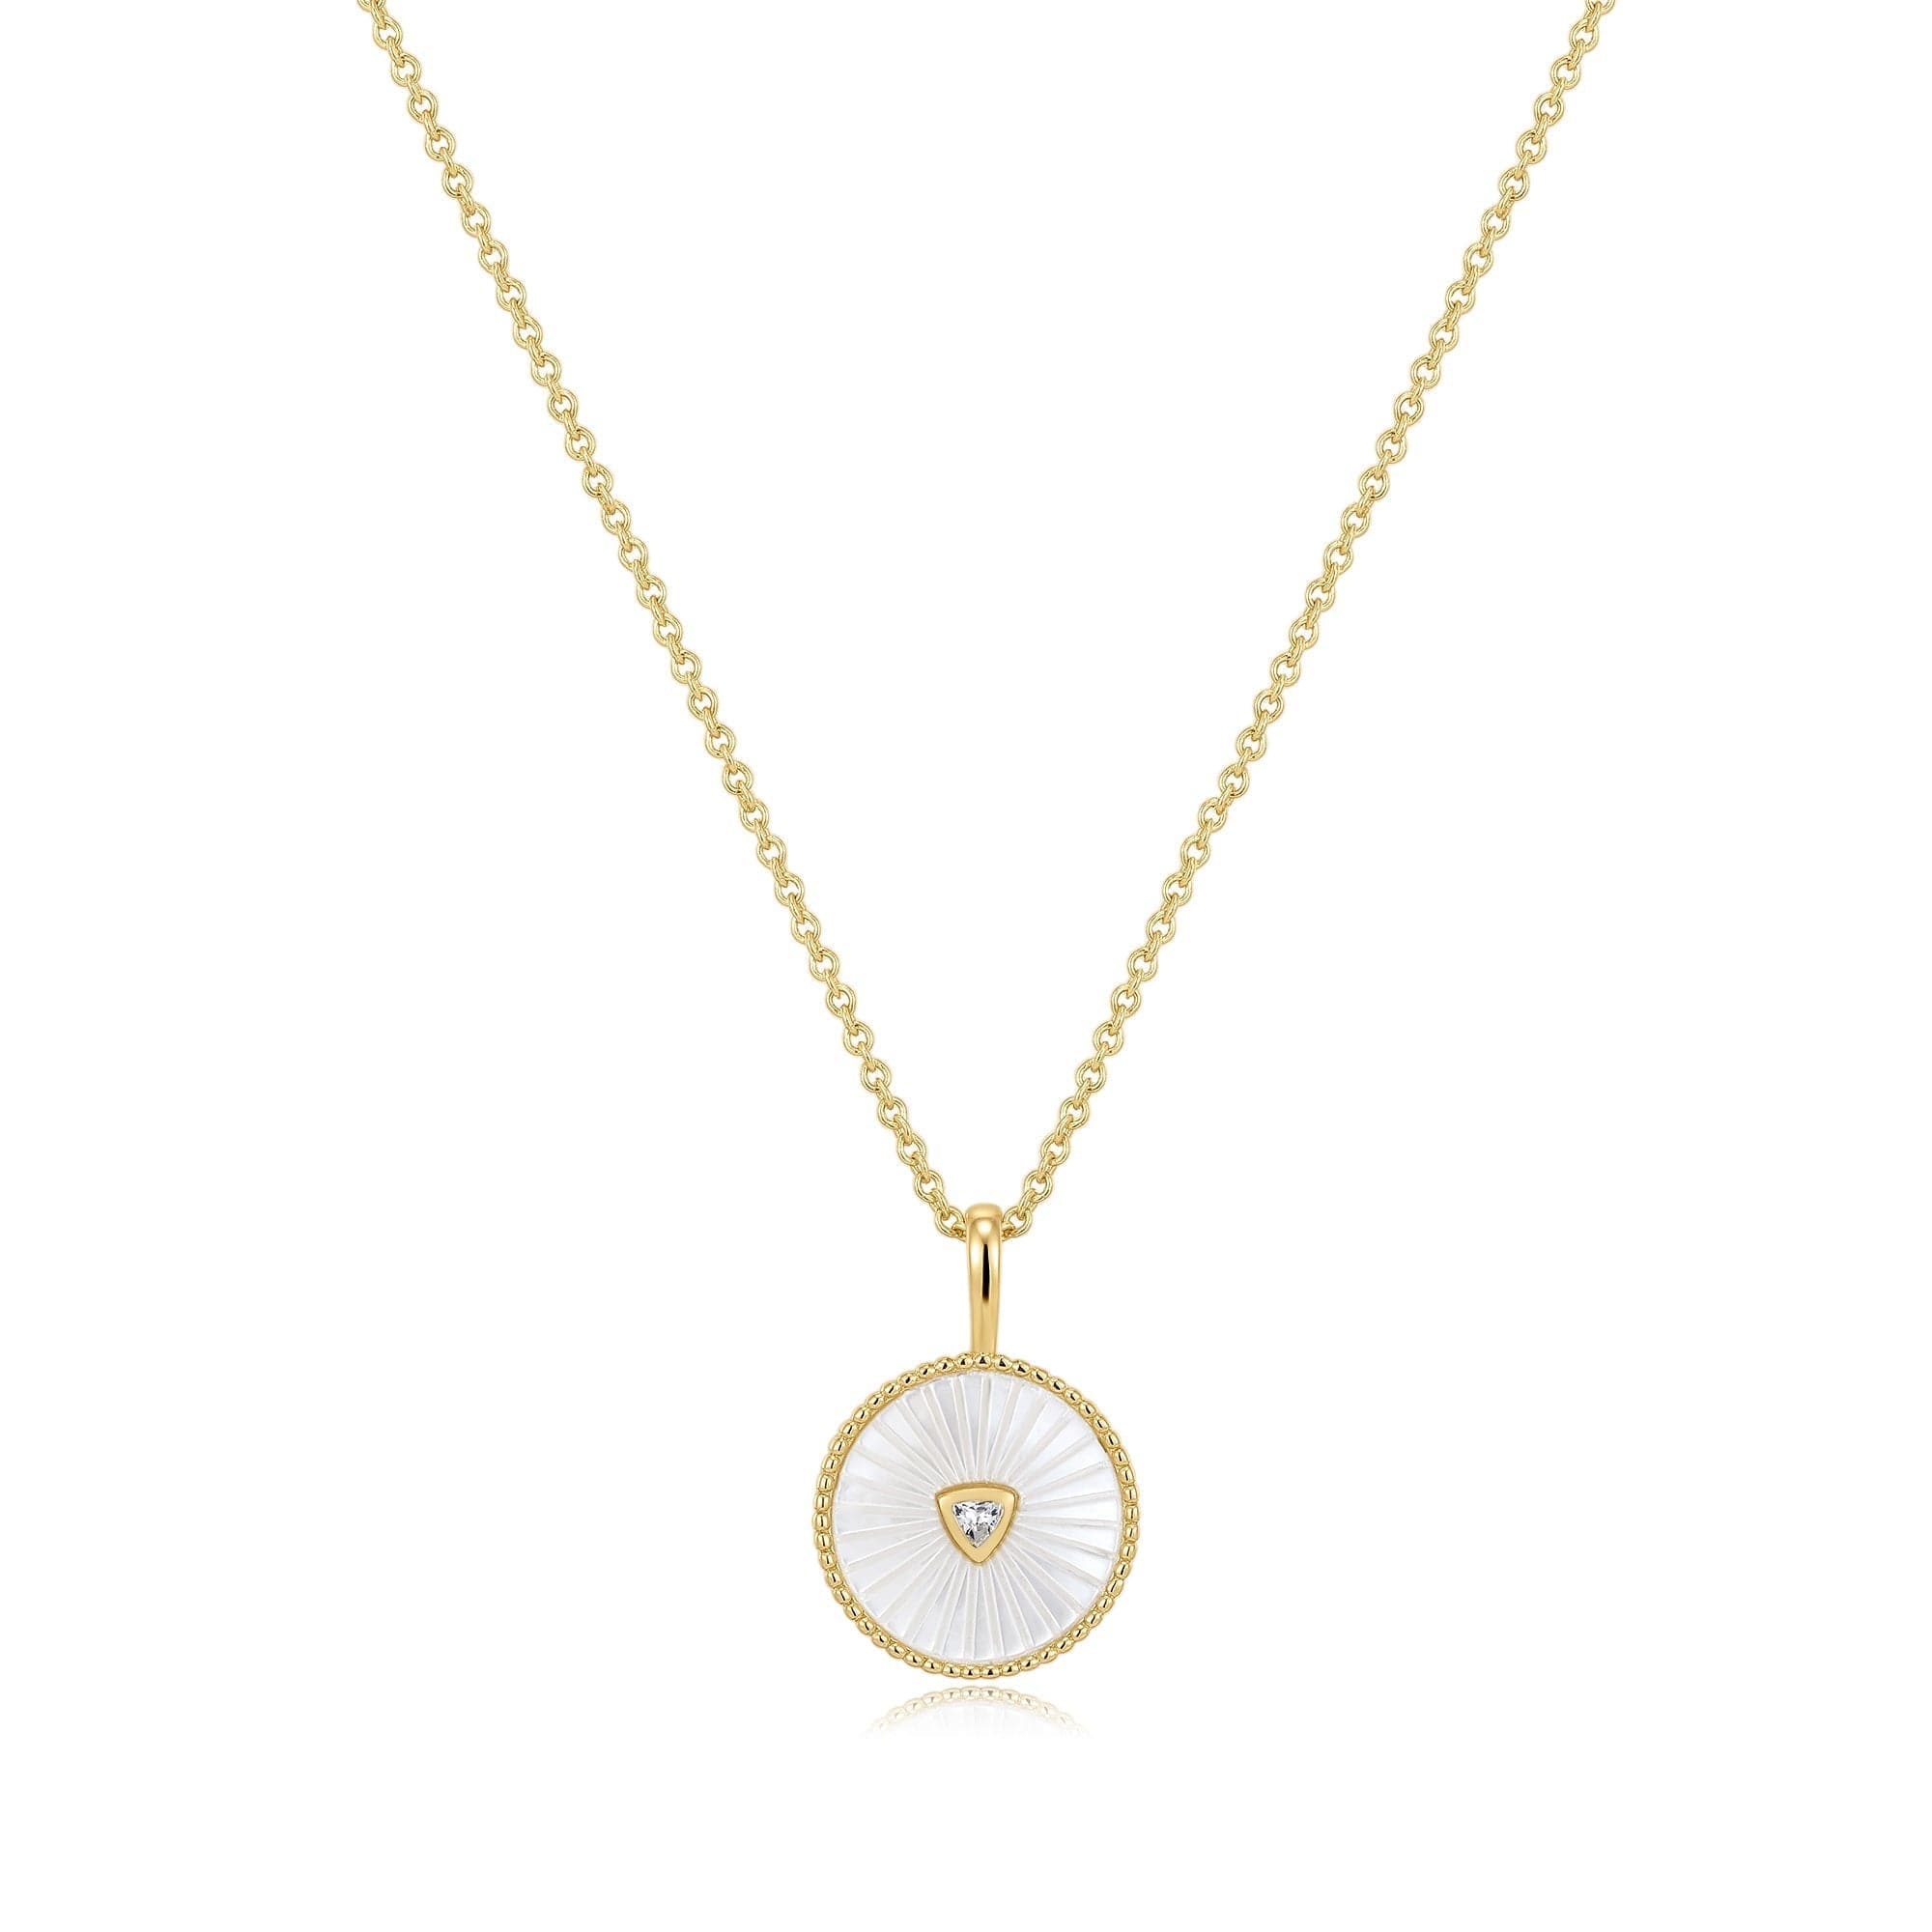 Round Mother Of Pearl Pendant With Cz Center Stone Necklace